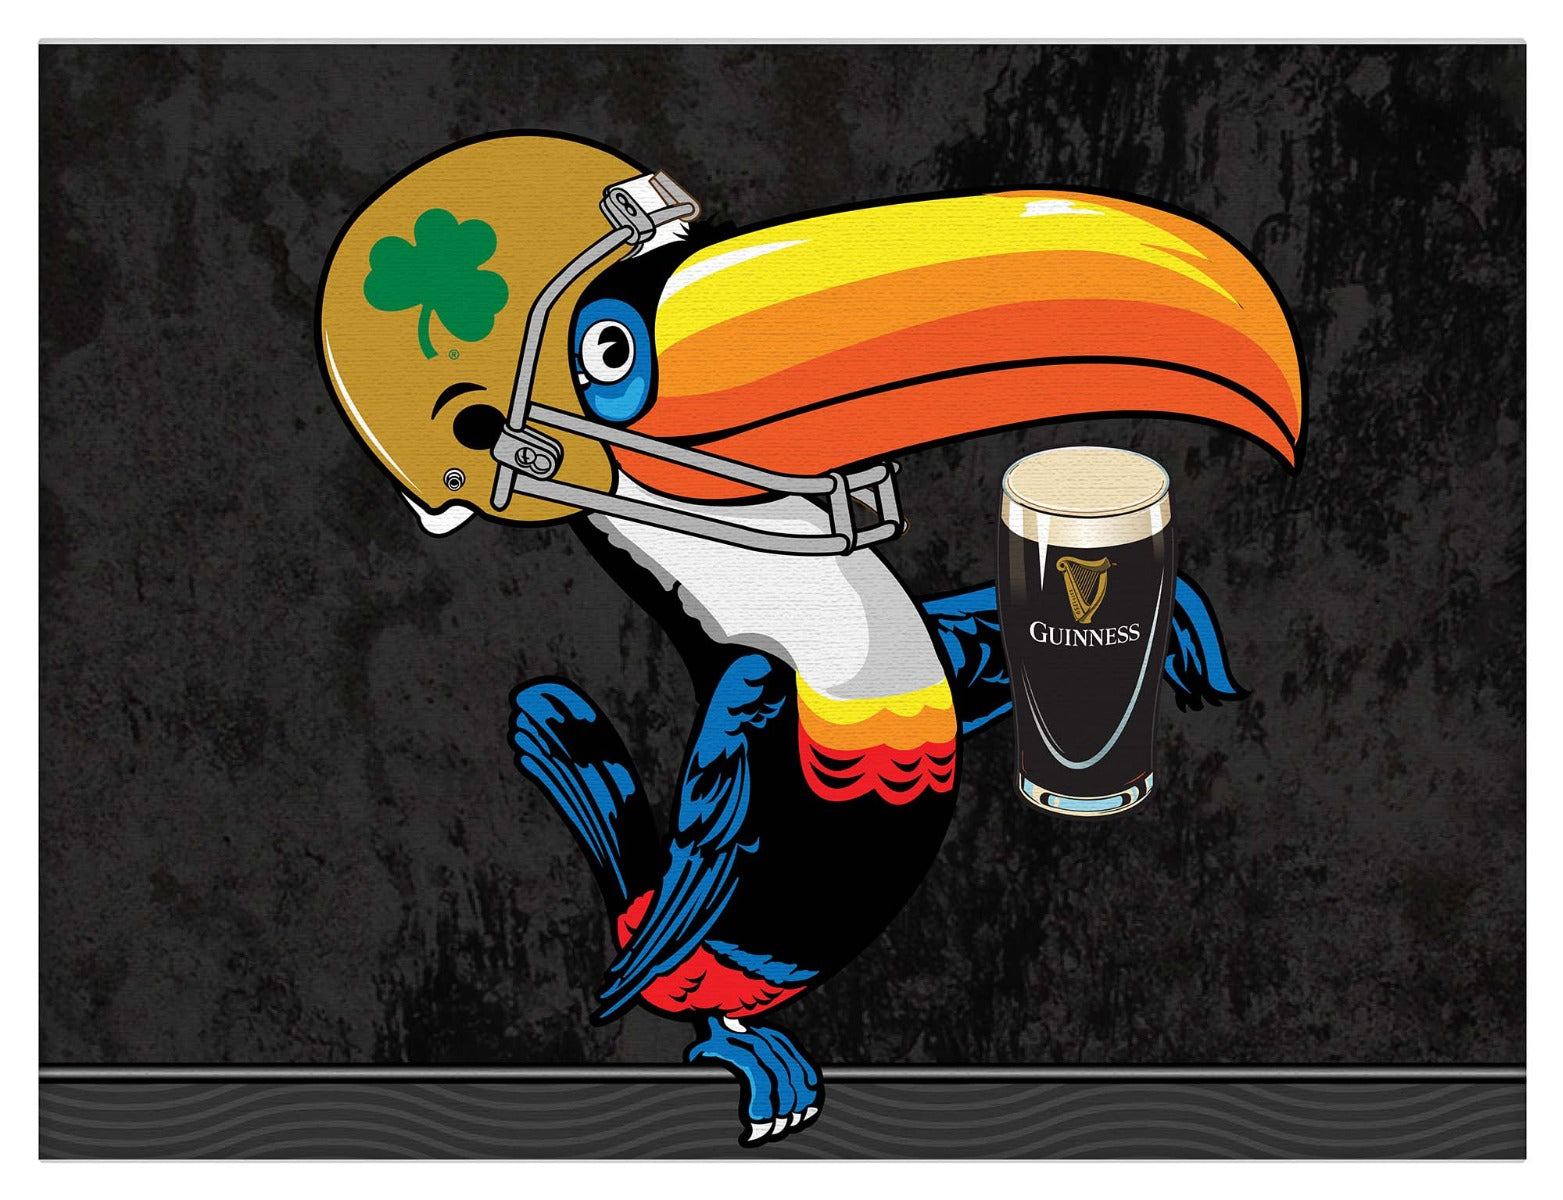 Description: A toucan holding a Guinness beer and a shamrock on a Guinness Notre Dame Toucan Landscape canvas wall art by Guinness.